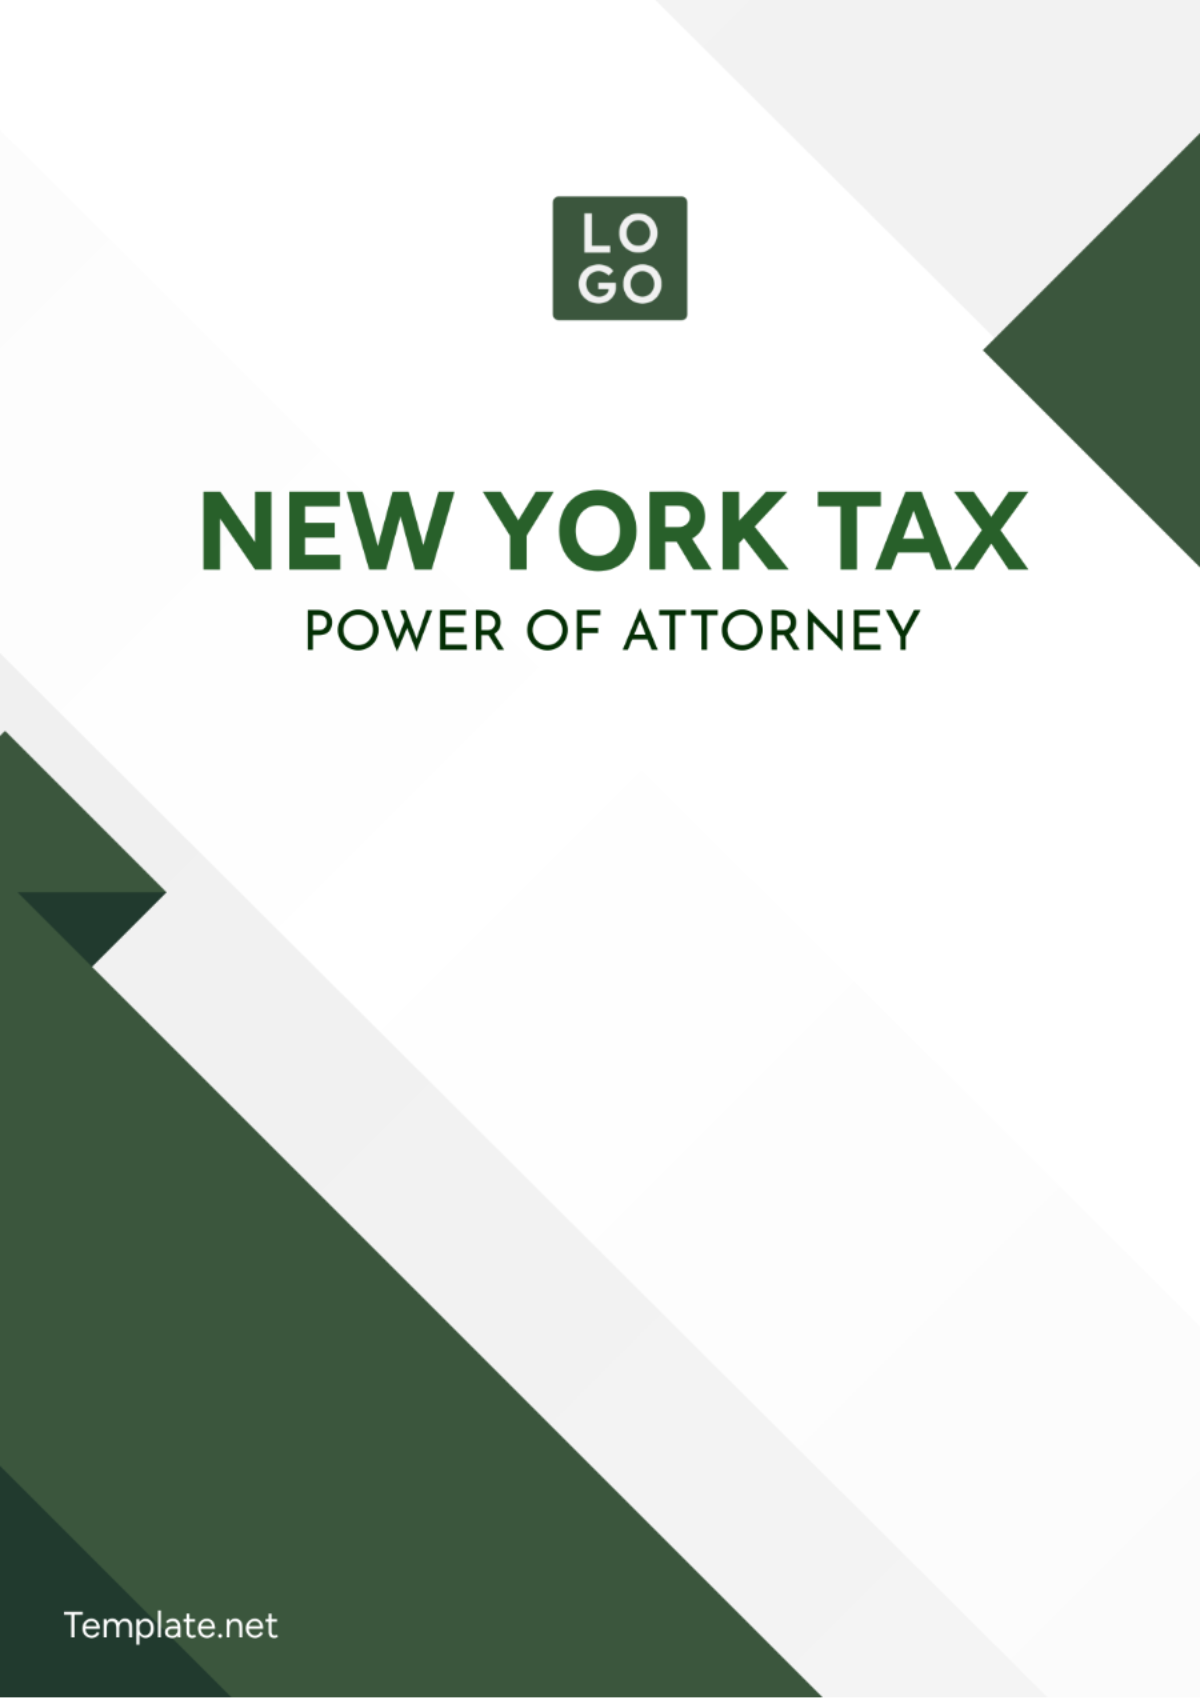 New York Tax Power of Attorney Template